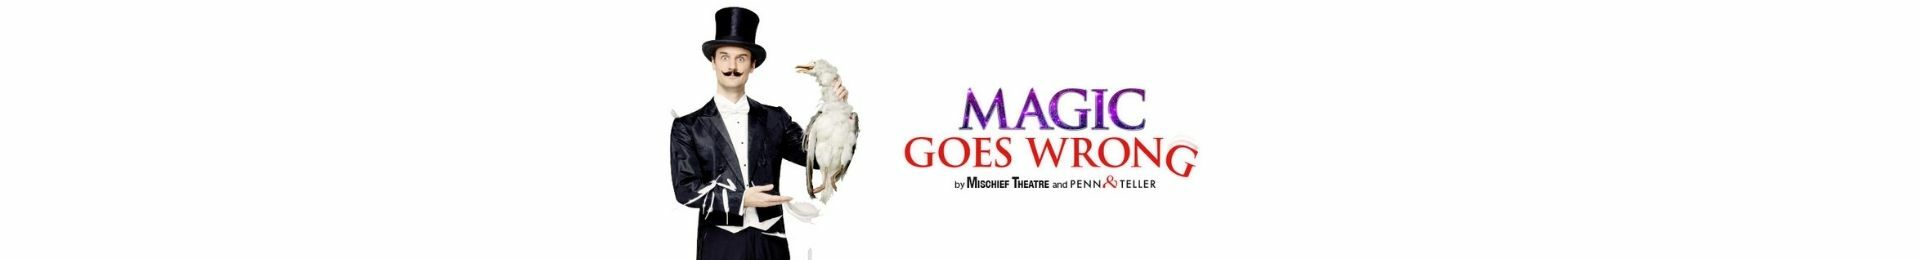 Magic Goes Wrong - Manchester banner image